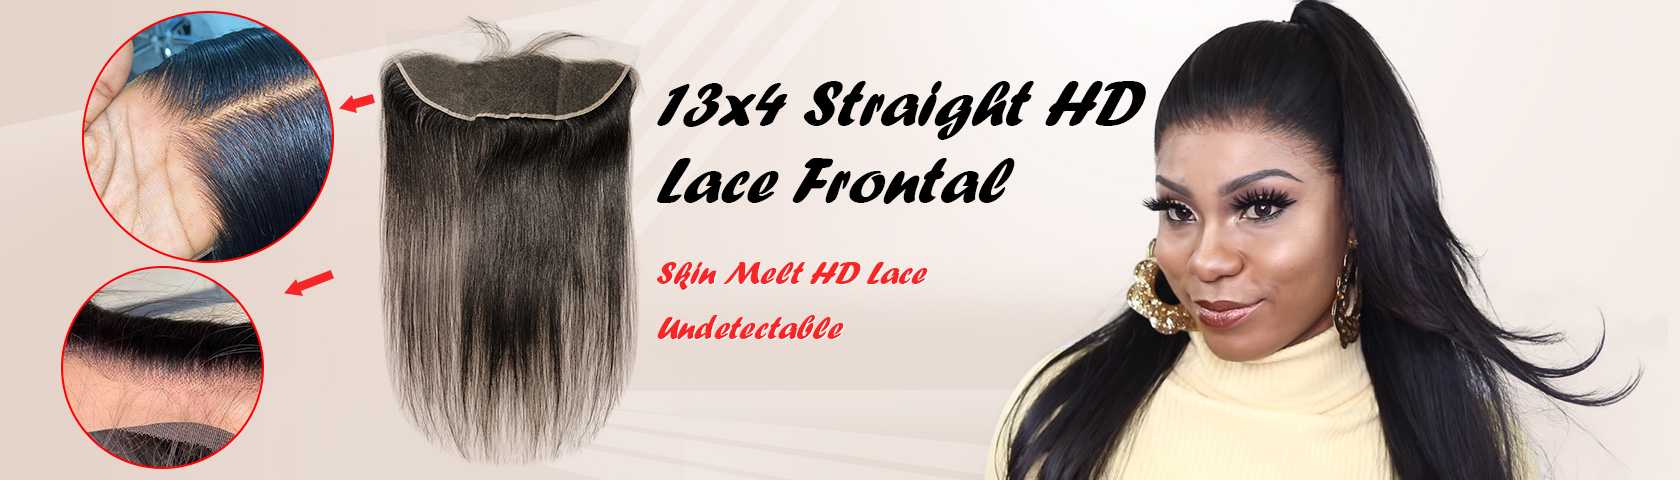 13x4 Straight Virgin Hair HD Lace Frontal